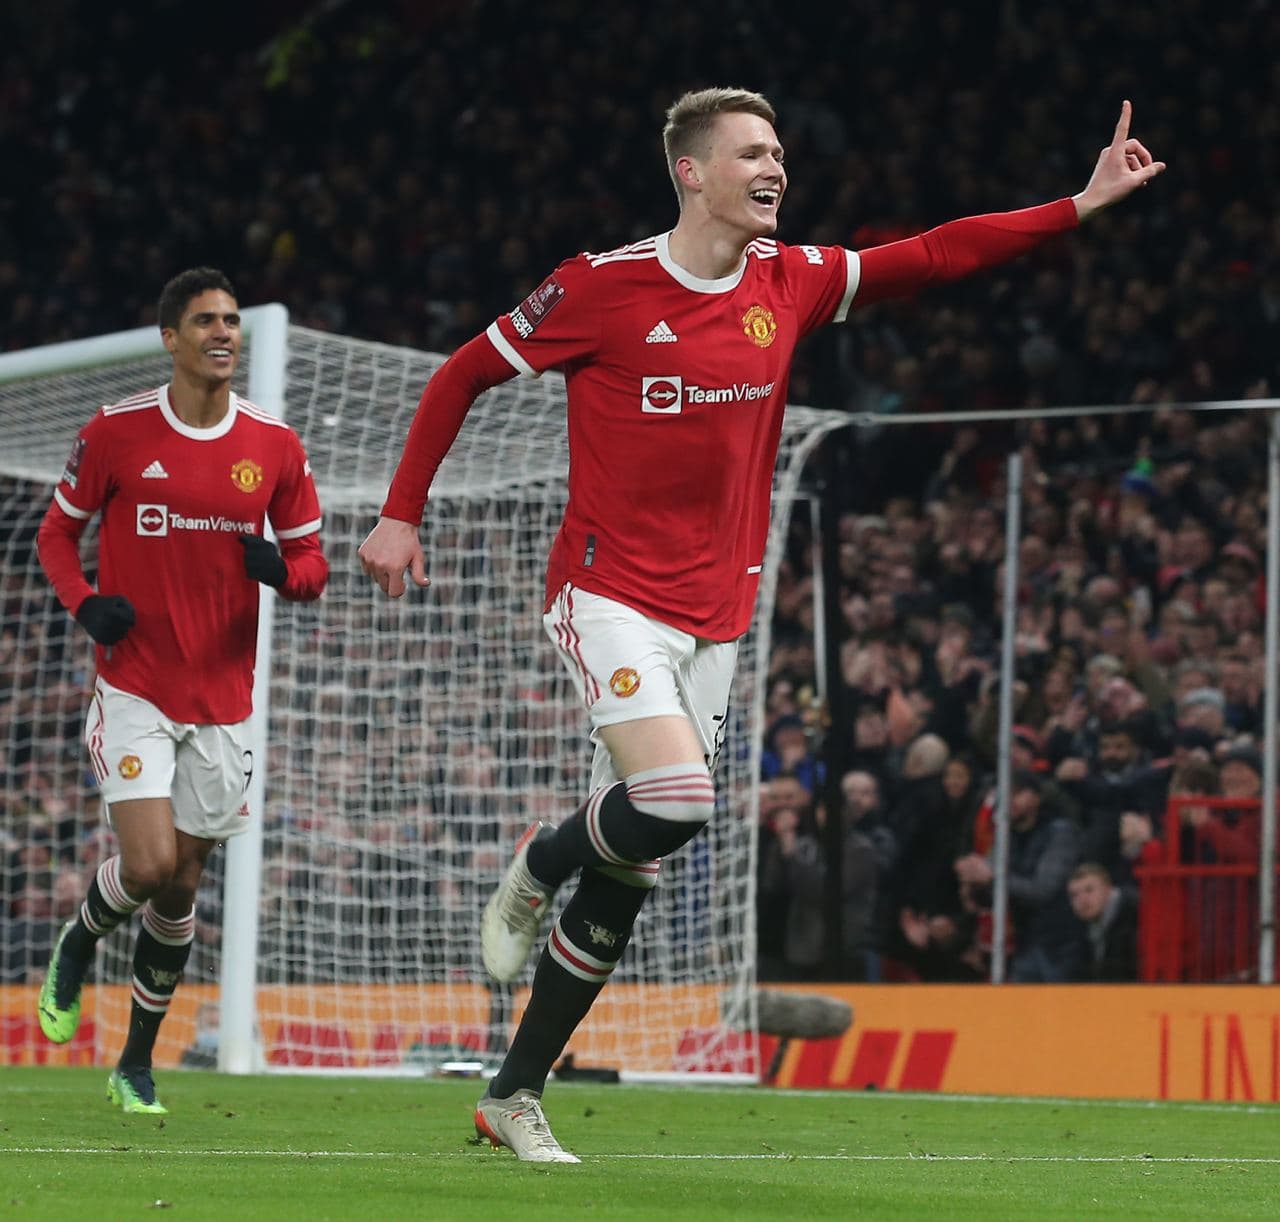 Emirates FA Cup 2022: Scott McTominay's goal sees Manchester United through to the 4th Round against Aston Villa